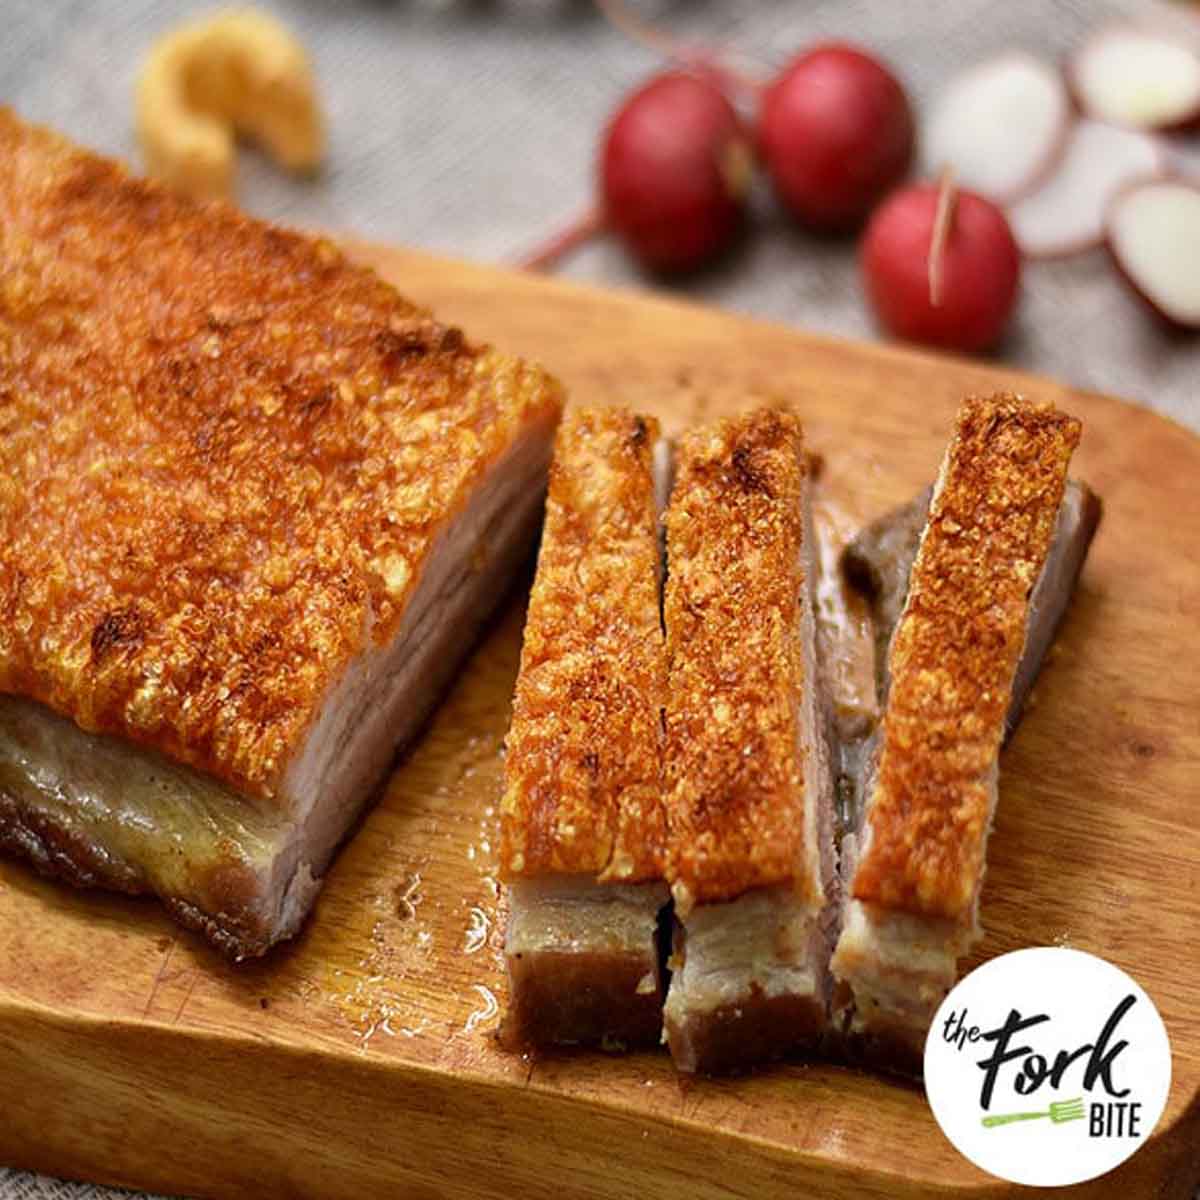 With your first bite on this Crispy Pork Belly, you can hear satisfying crackles of the skin, followed by the lip-smacking fat layer. You can’t imagine such heaven-sent pizzazz on a plate.